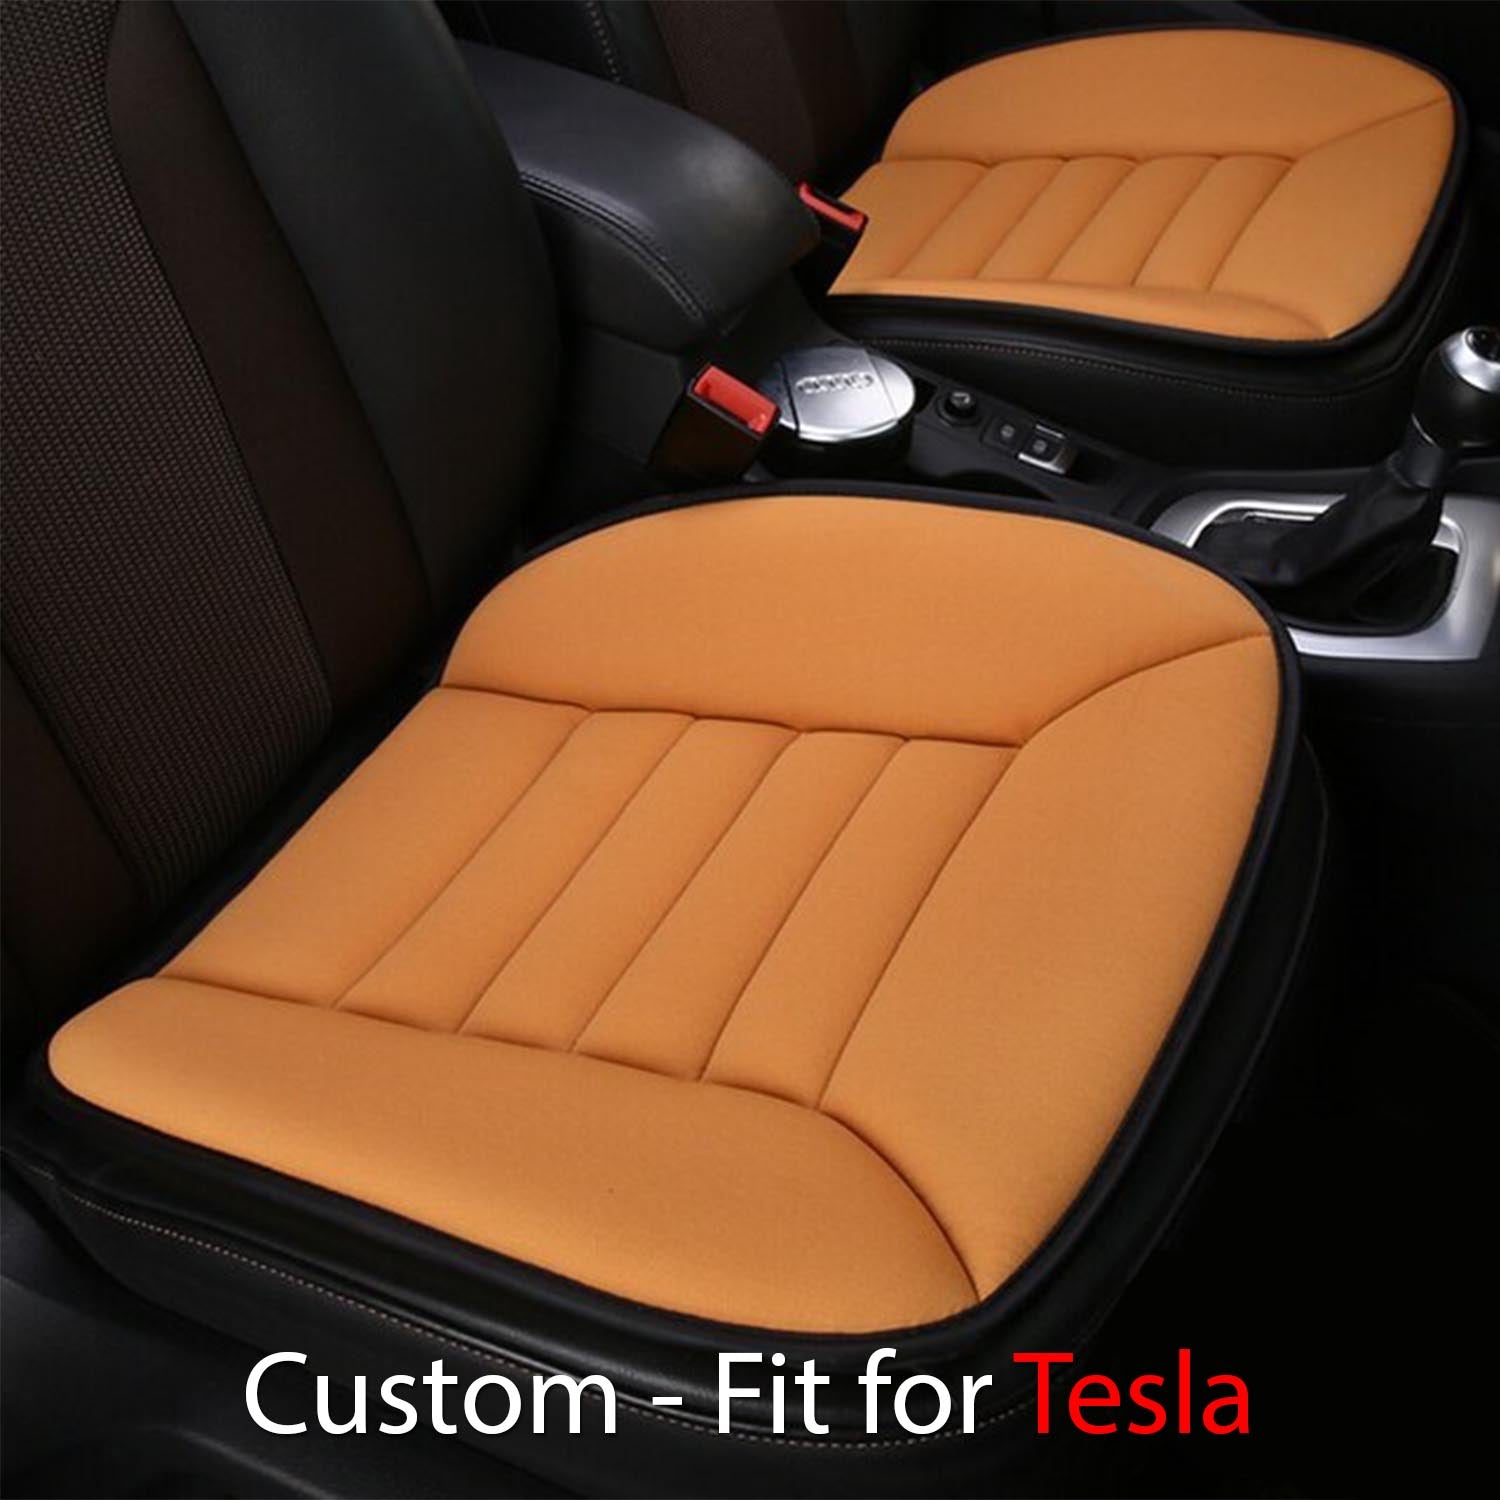 Car Seat Cushion with 1.2inch Comfort Memory Foam, Custom-Fit For Car, Seat Cushion for Car and Office Chair DLTY247